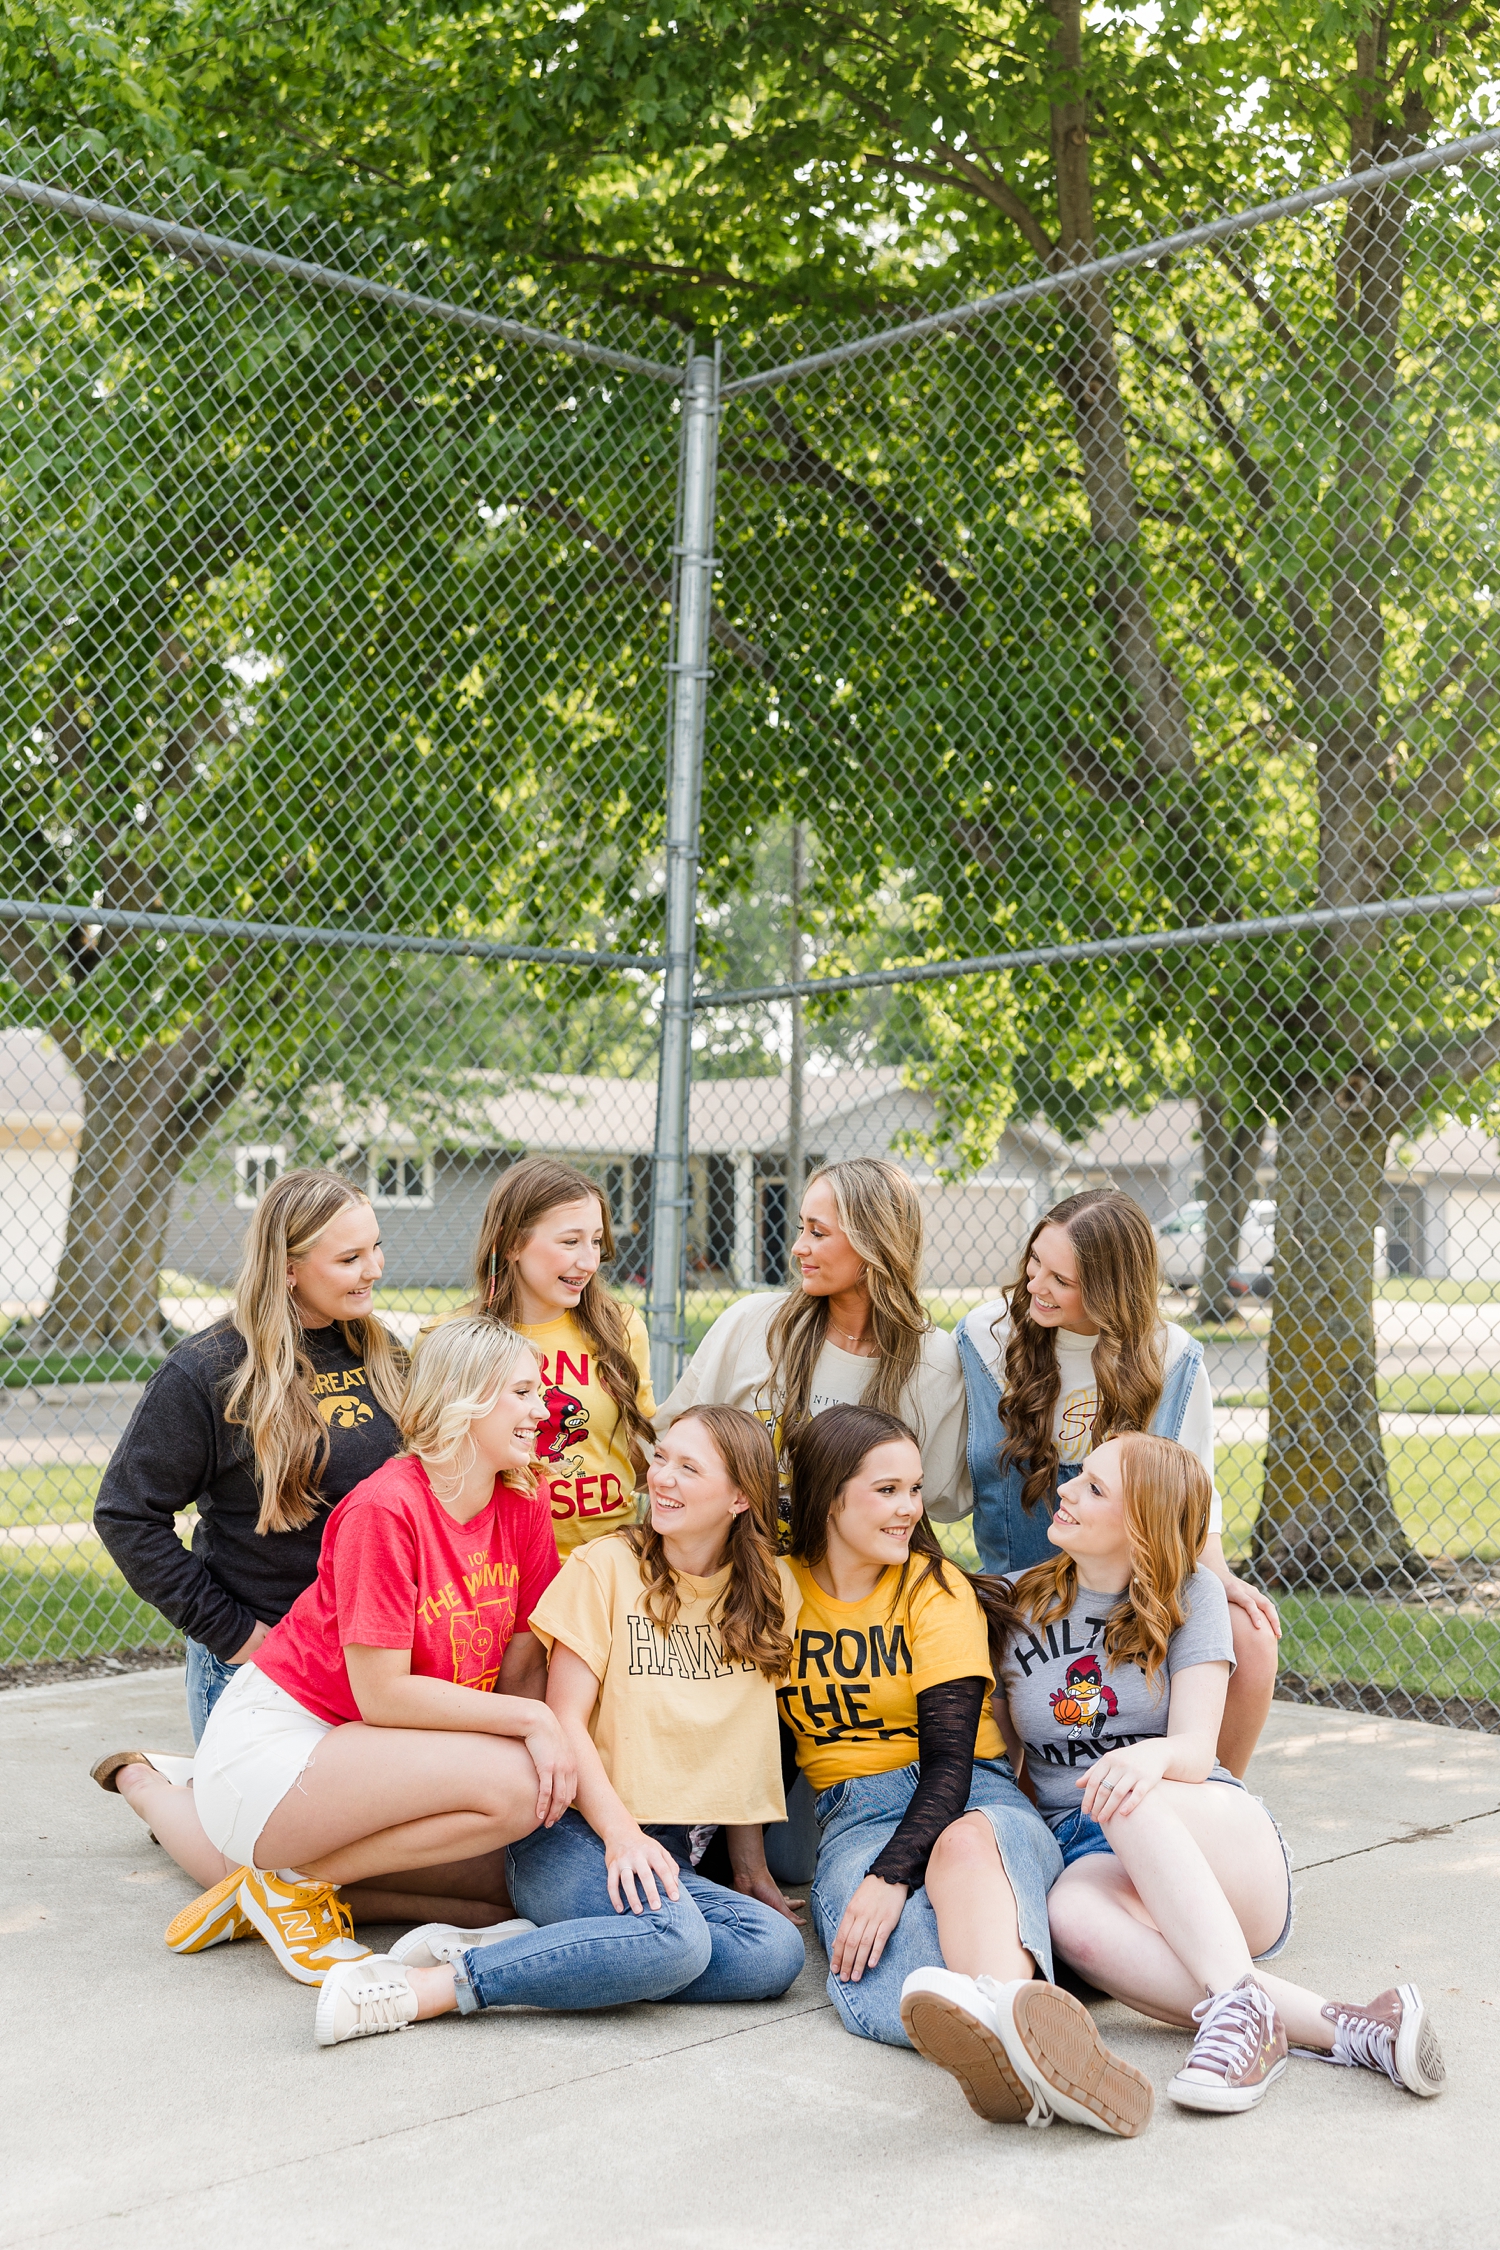 TEAM 25, all wearing Iowa or Iowa State clothing, sit in a group and smile at each other in an outdoor basketball court | CB Studio